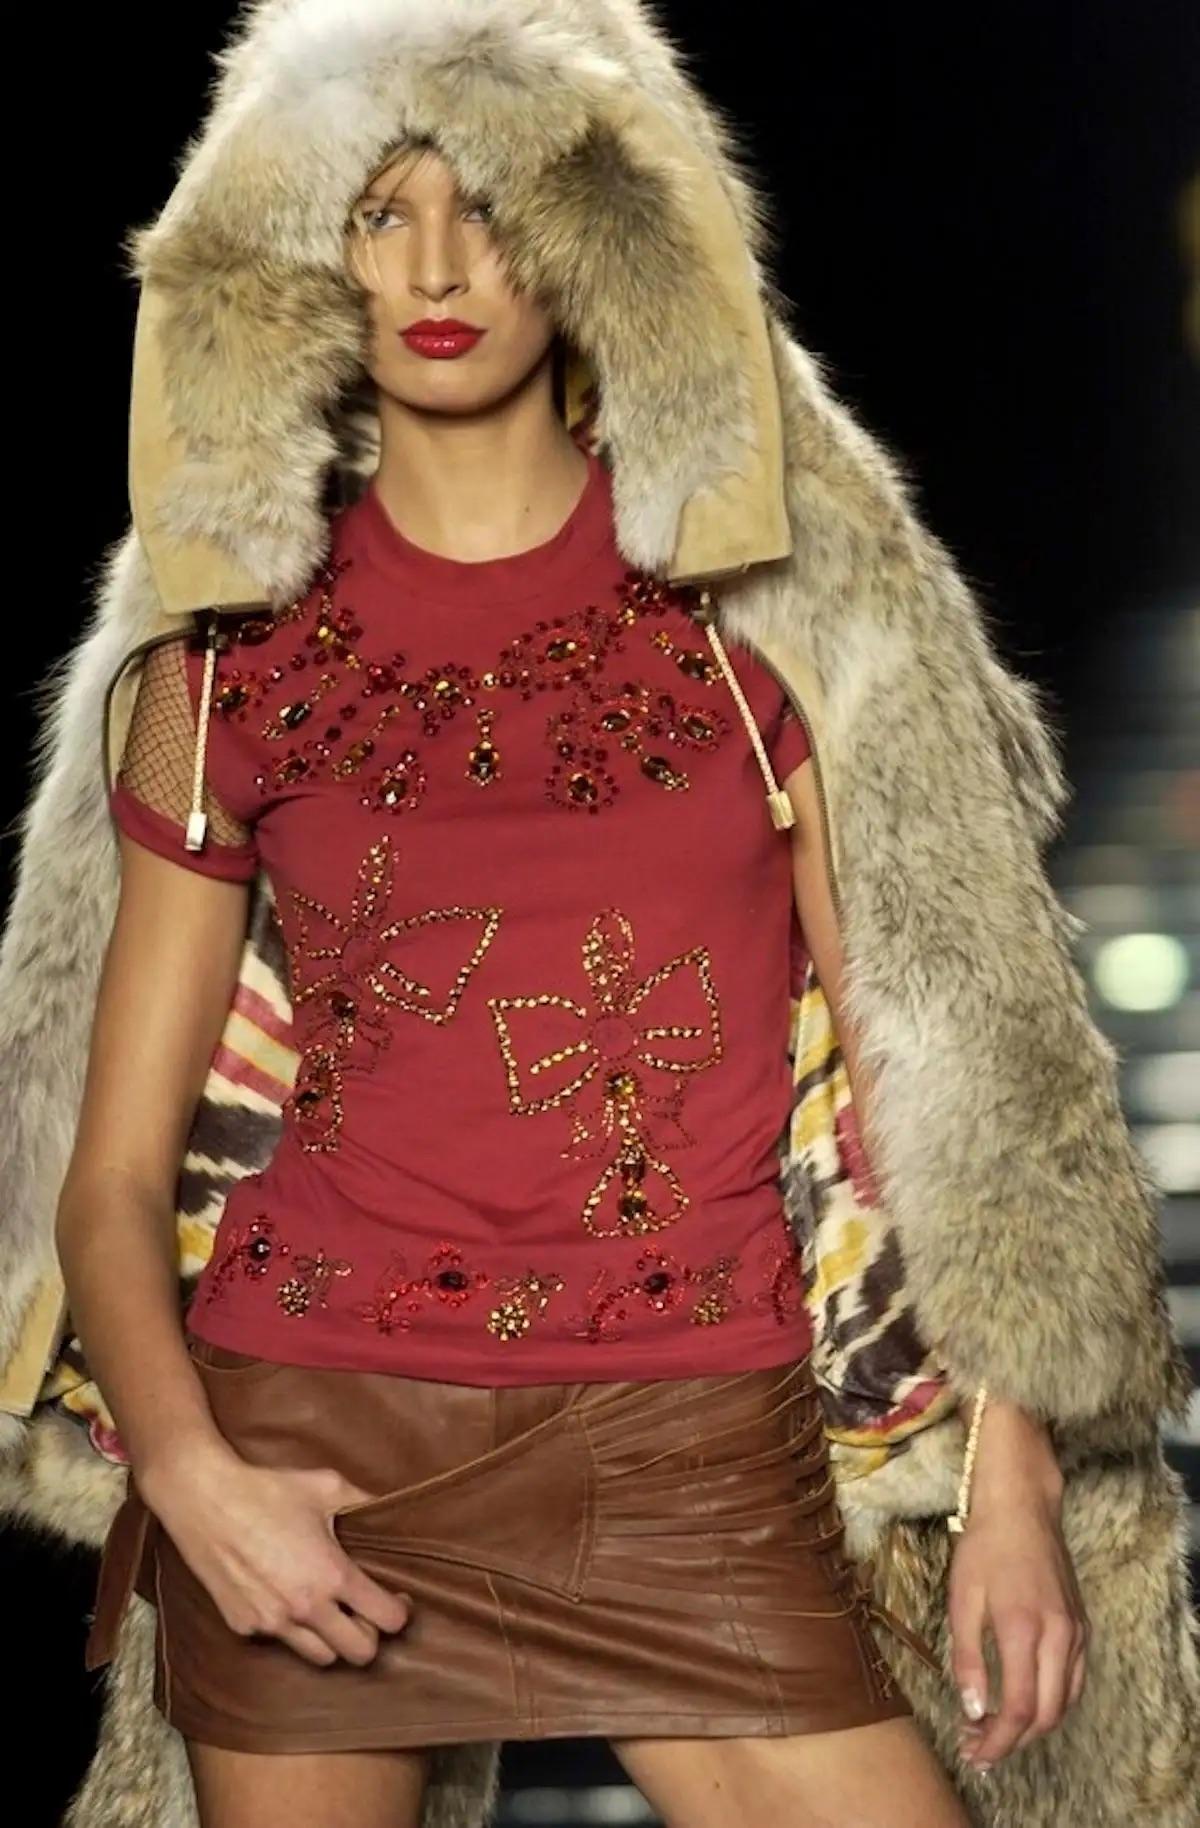 John Galliano designed this Christian Dior brown leather mini skirt for the Fall/Winter 2002 collection. Constructed entirely of leather, this short skirt debuted on the season's runway and features a lace-up accent at one side that juts into